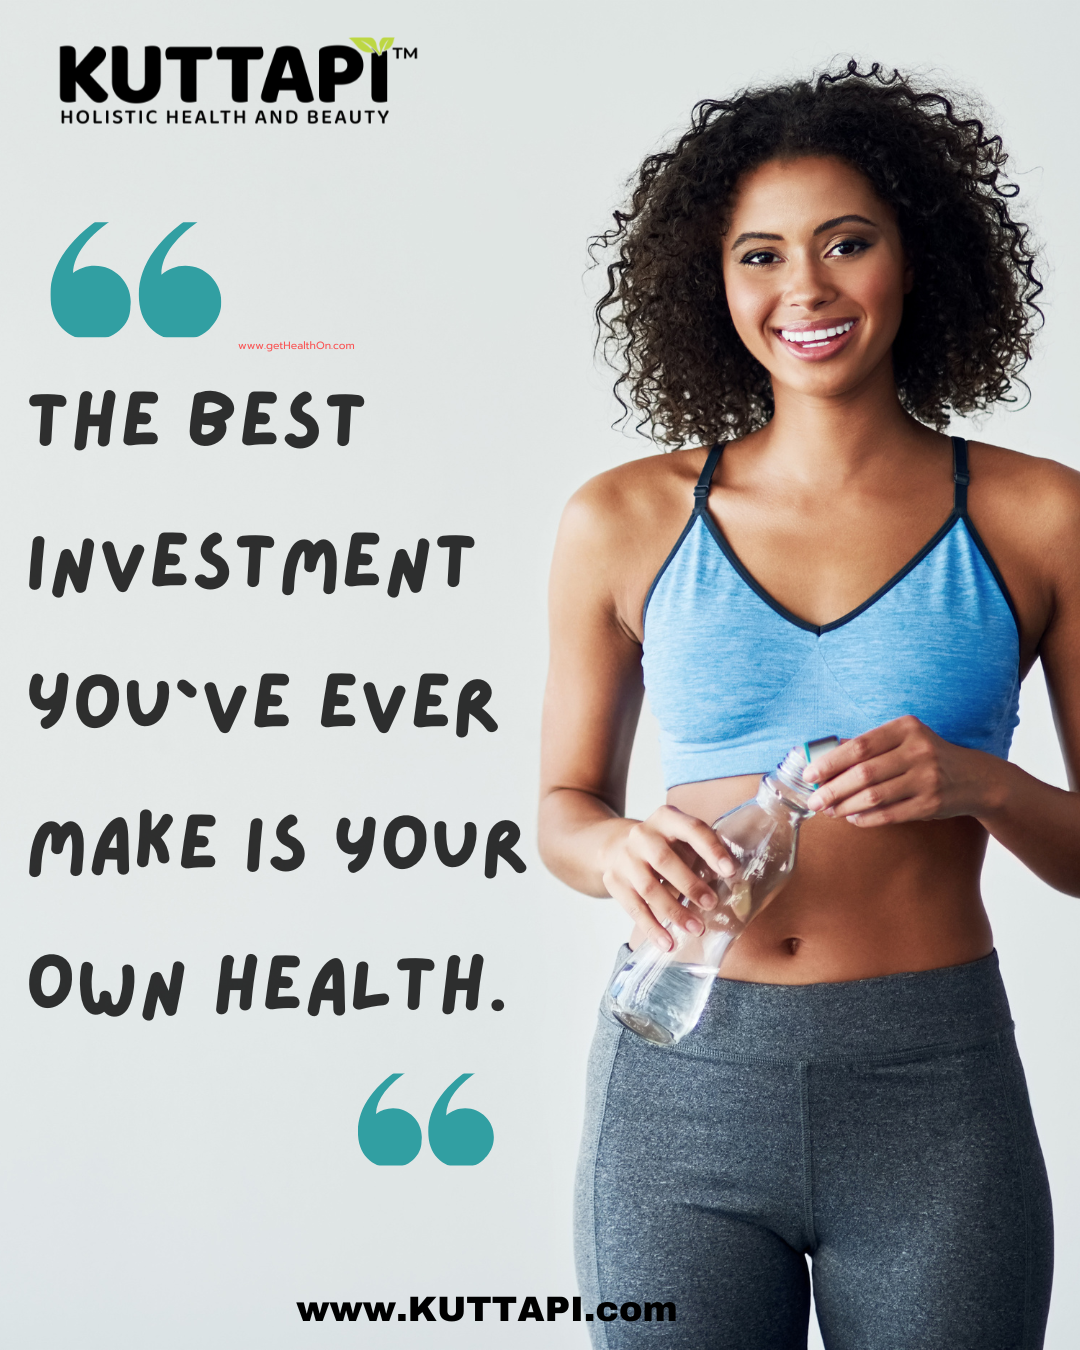 "The Best Investment You've Ever Make is Your Own Health"